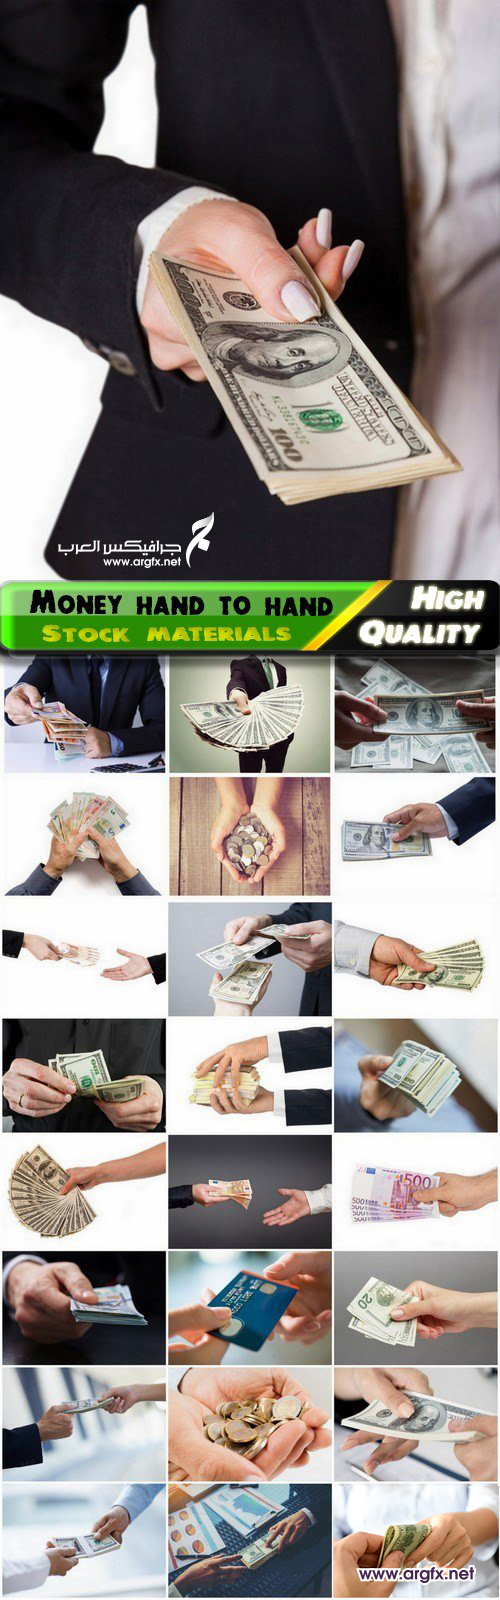  Business concept with money hand to hand - 25 HQ Jpg